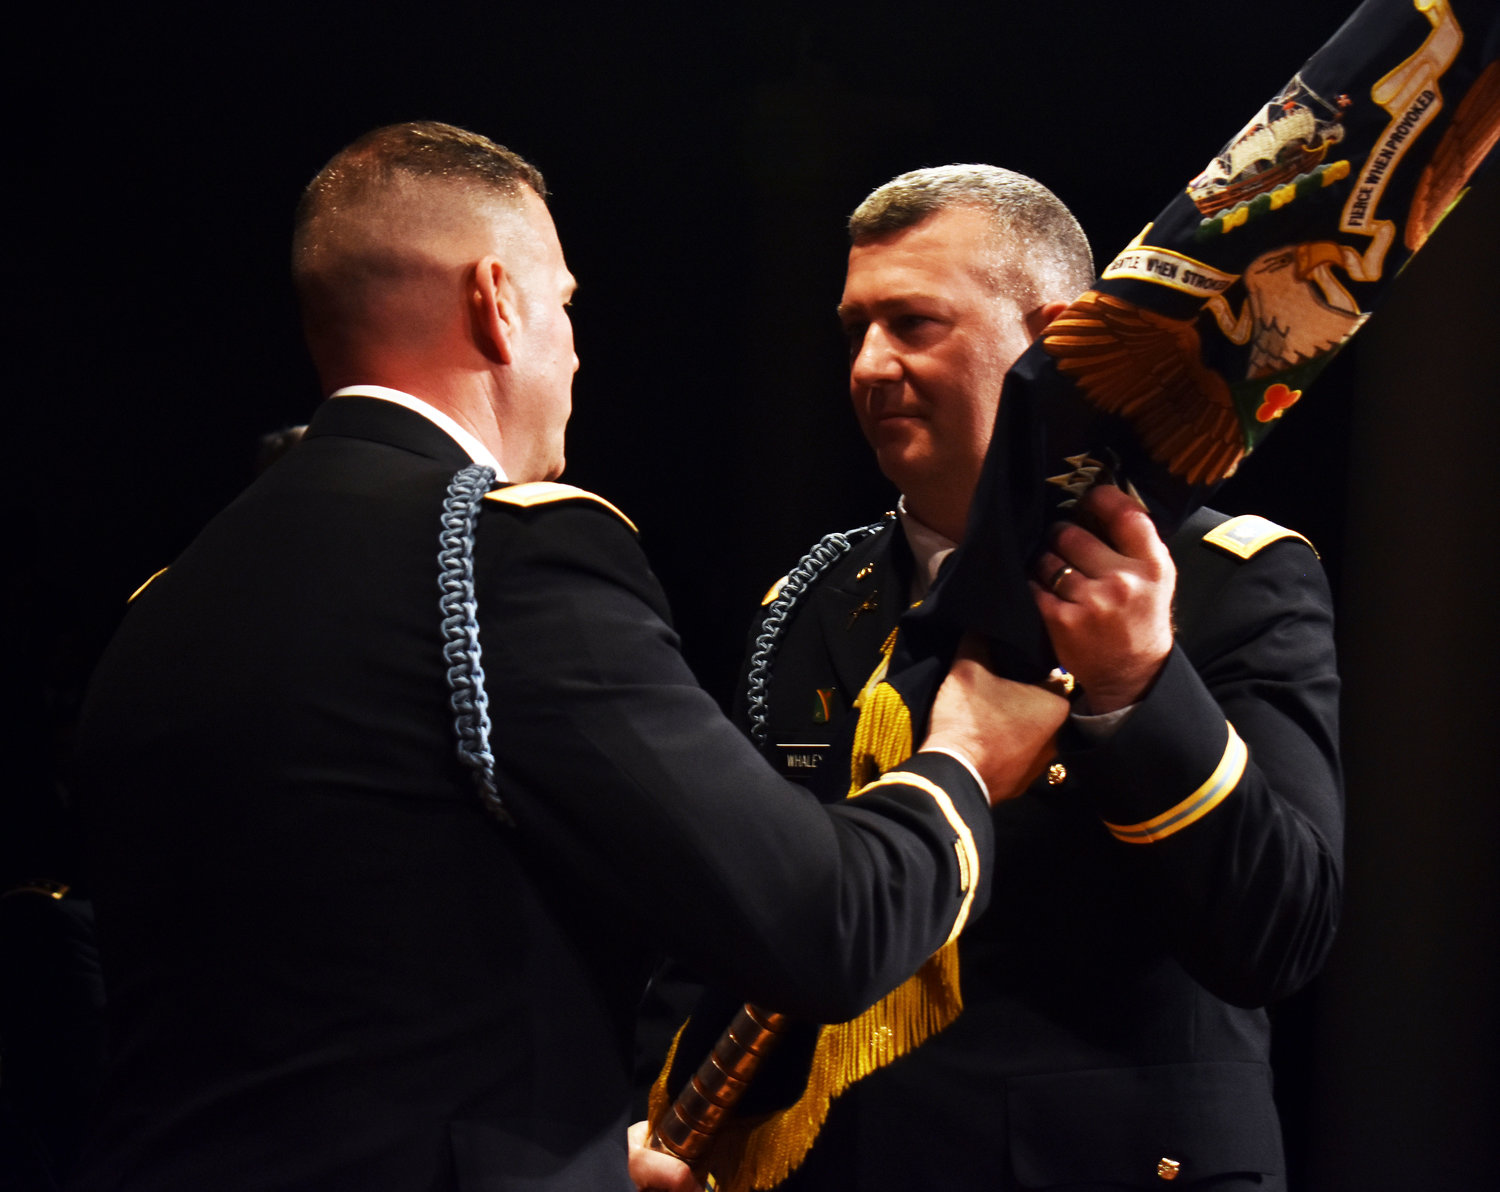 Lt. Col. Joseph Whaley, right, received the colors of the 1st Battalion, 69th Infantry from Col. Christopher Cronin, the commander of the 27th Infantry Brigade Combat Team, during change of command ceremonies held on March 16 at the Cooper Union in Manhattan.